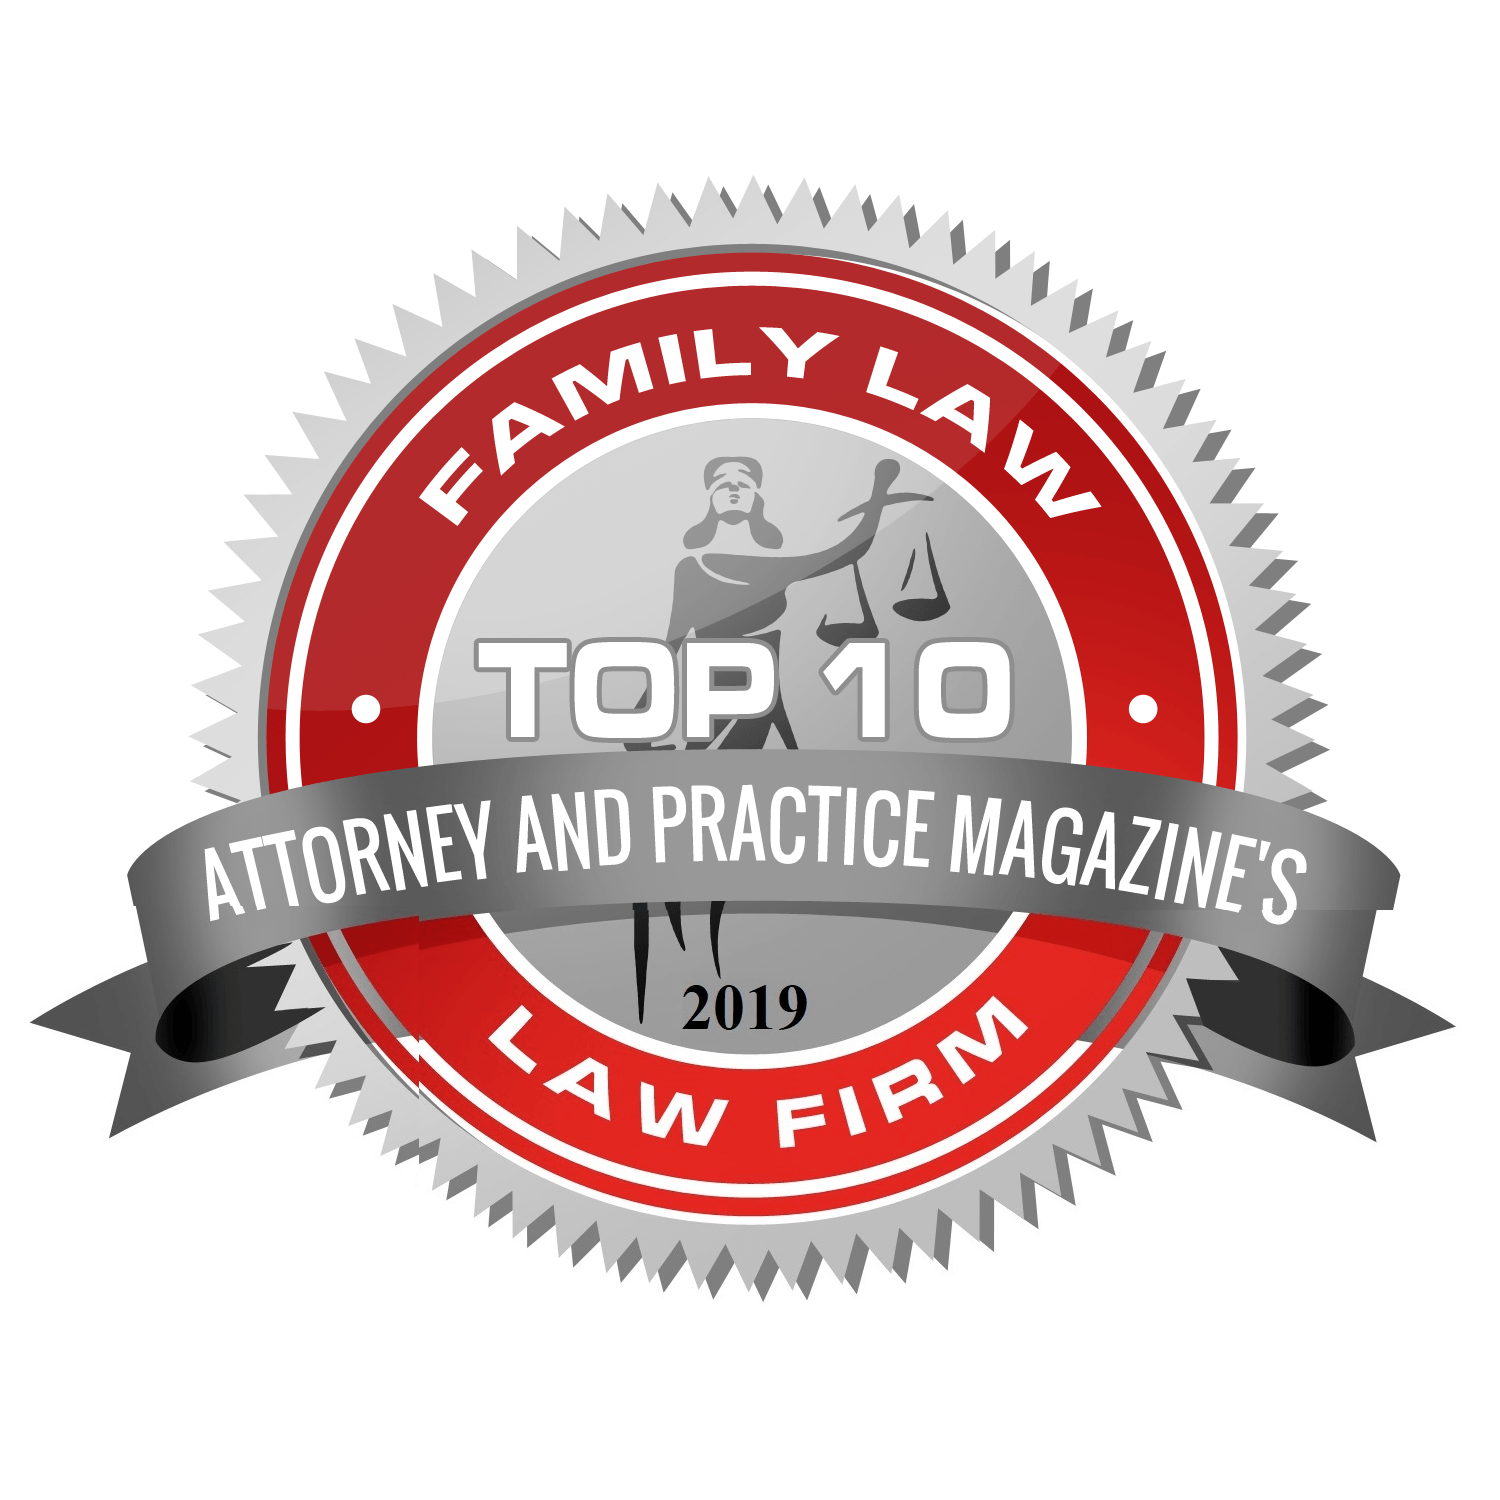 Attorney and Practice Magazine's  Top 10 Family Law Law Firm Award